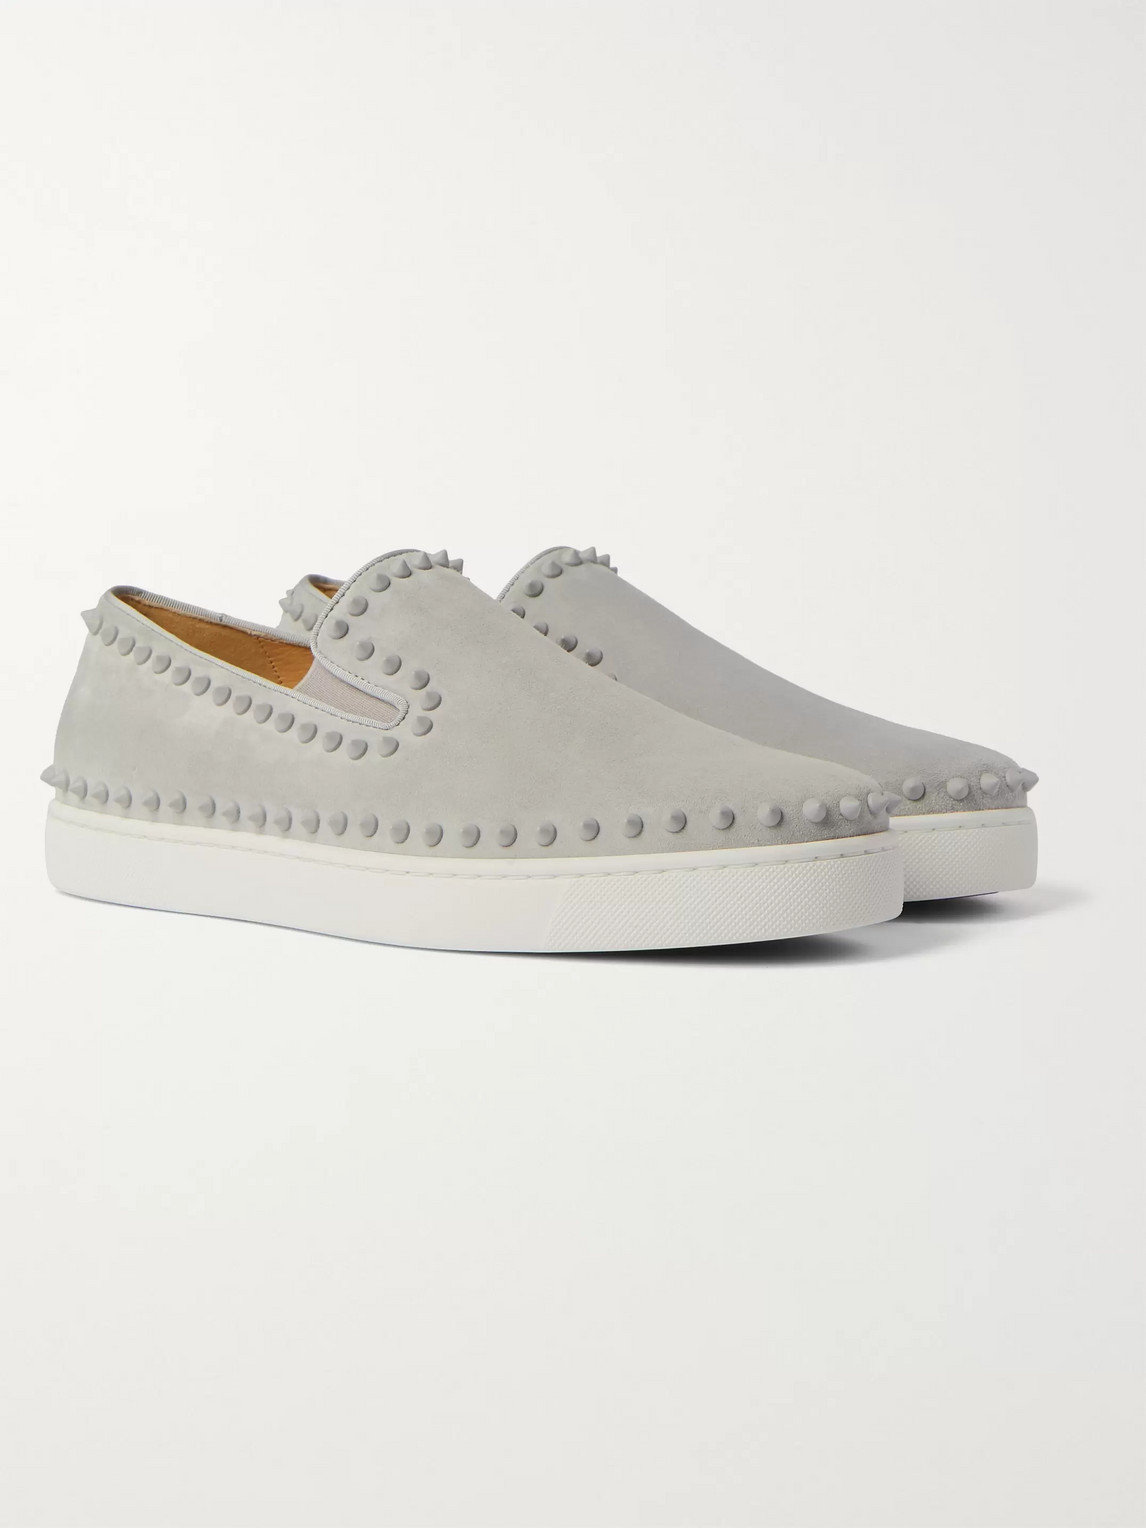 Christian Louboutin Pik Boat Studded Suede Slip-on Sneakers In Gray